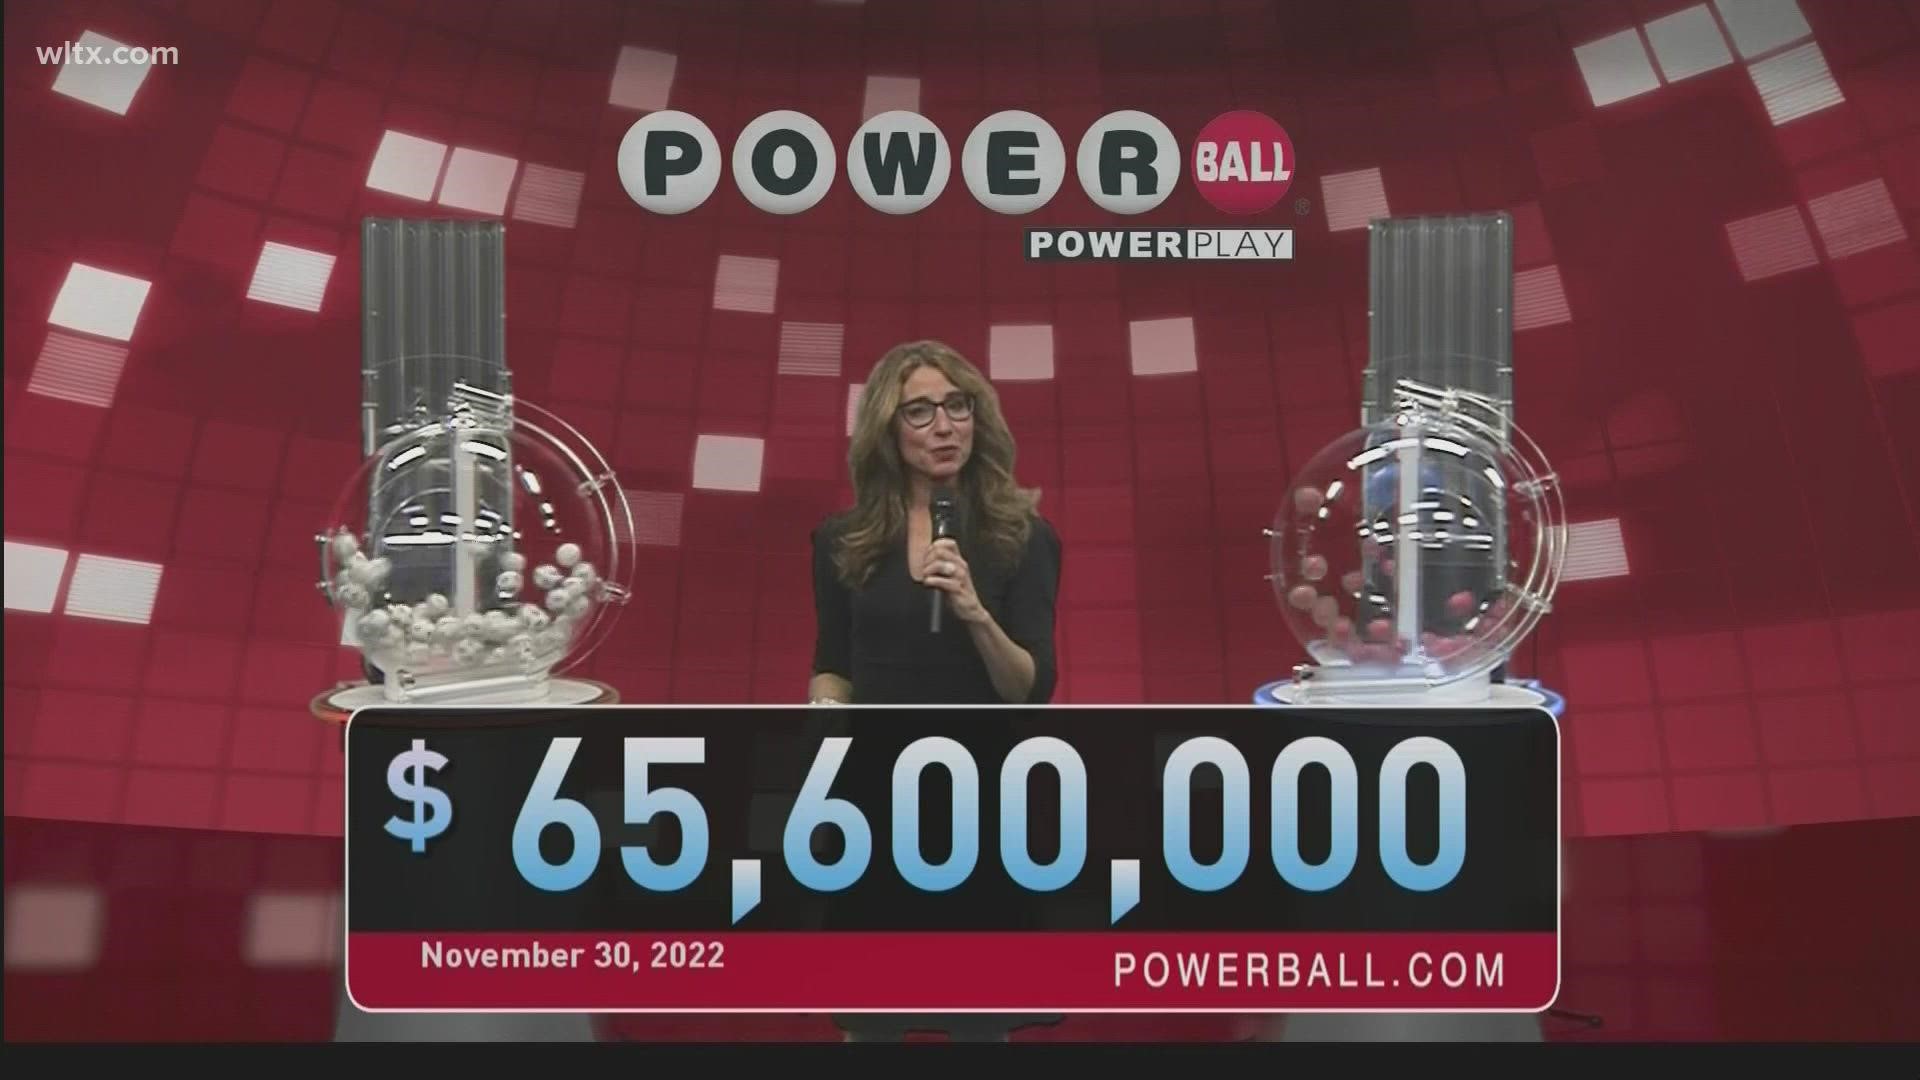 Here are the winning Powerball numbers for Wednesday, November 30, 2022.